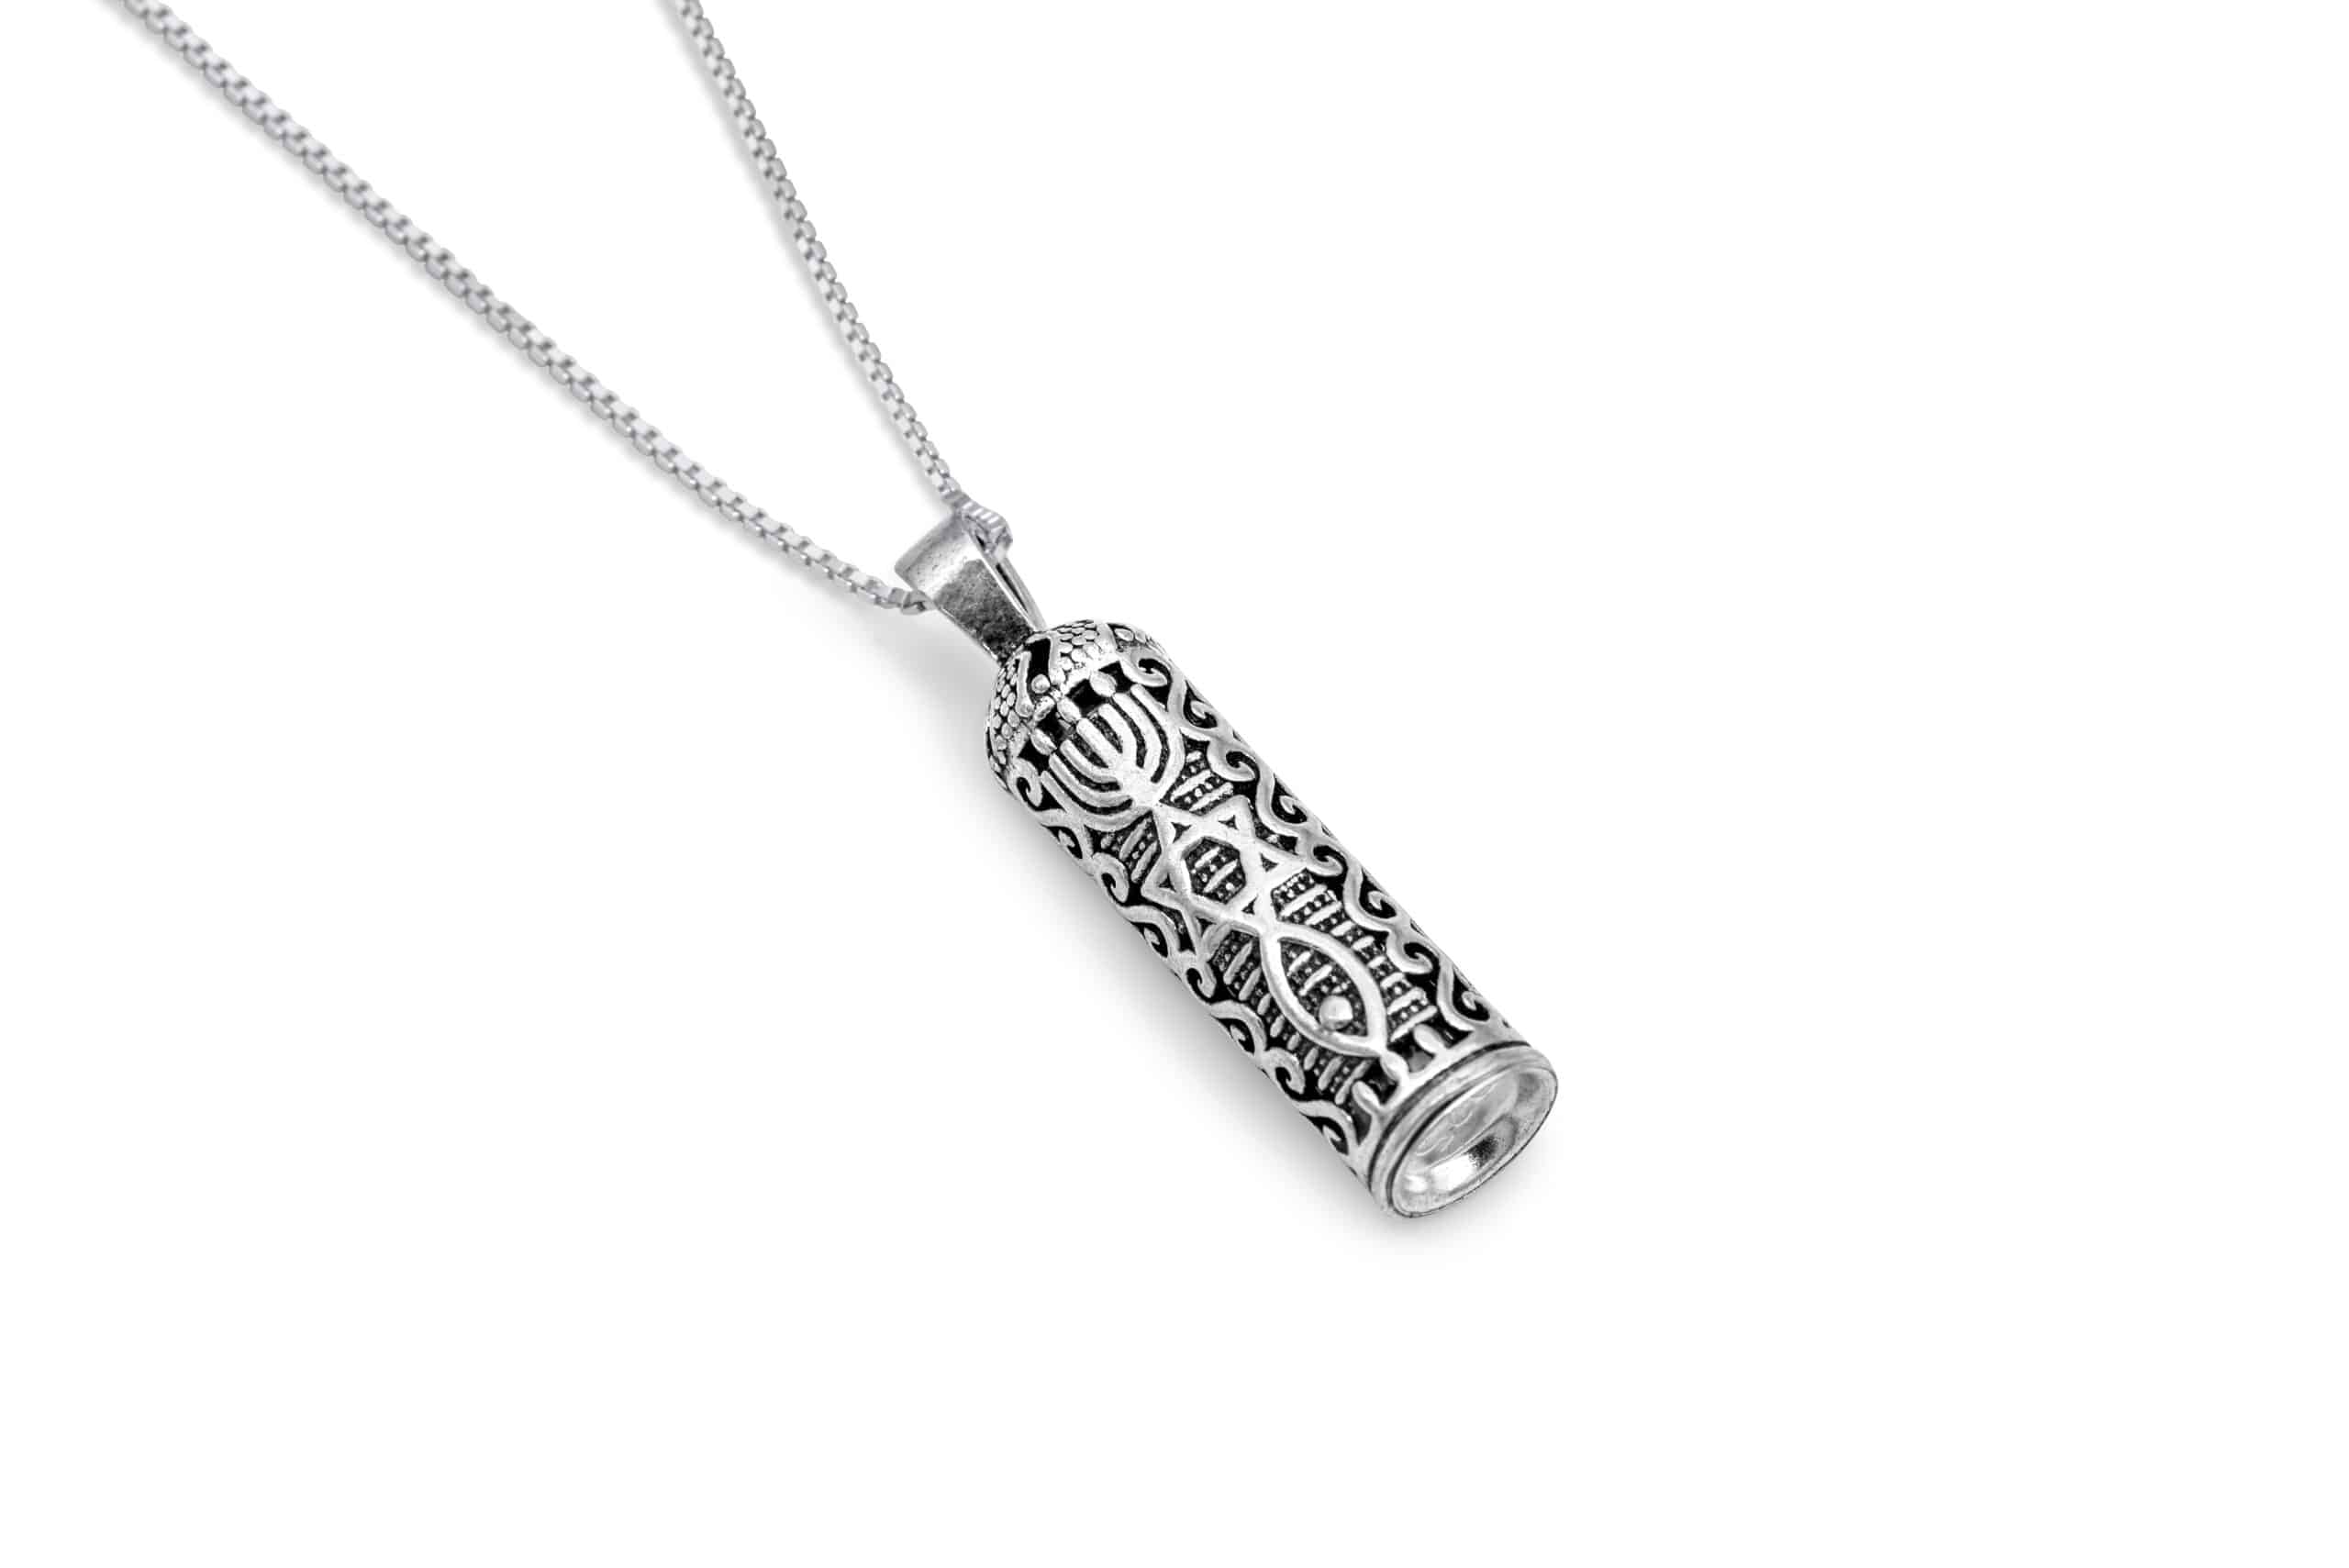 Mezuzah Silver Pendant with Symbols from Judaism